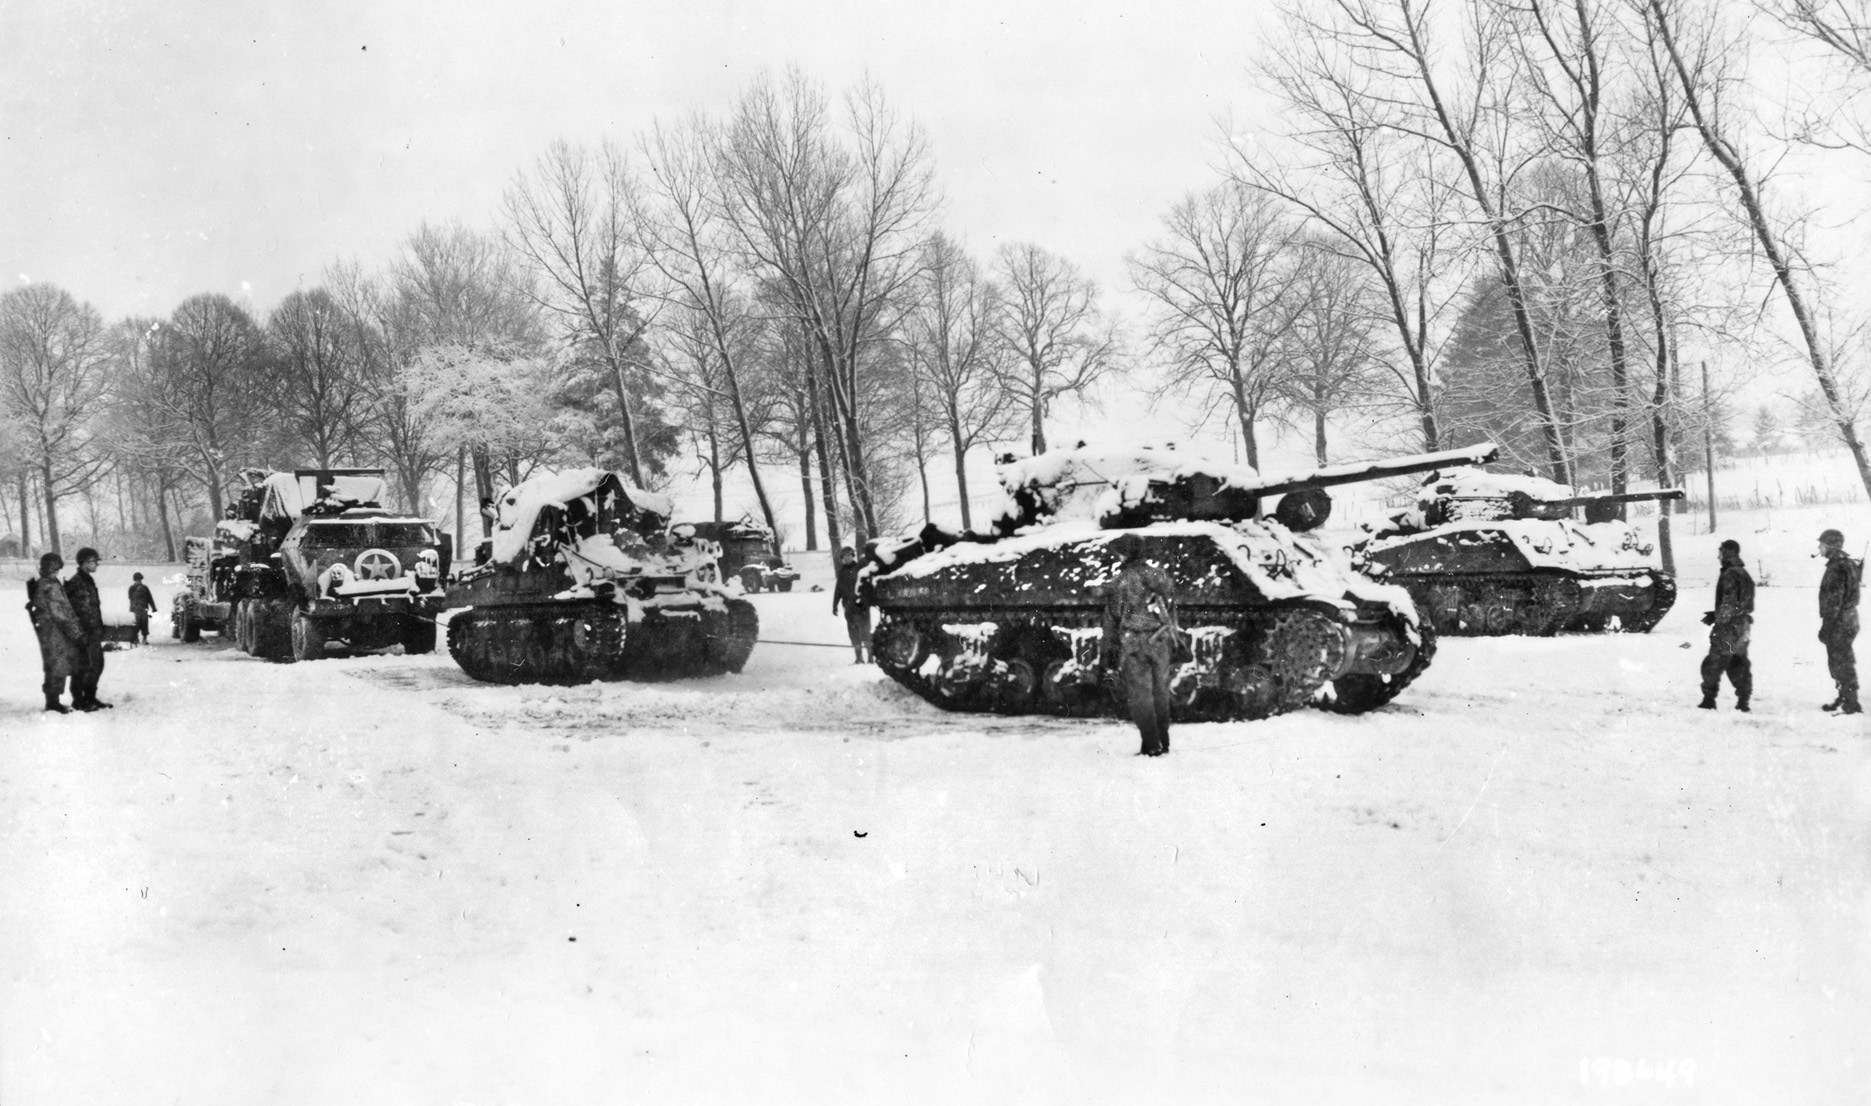 9th Armored Division troops prepare to recover tanks disabled during fighting in the Bulge.